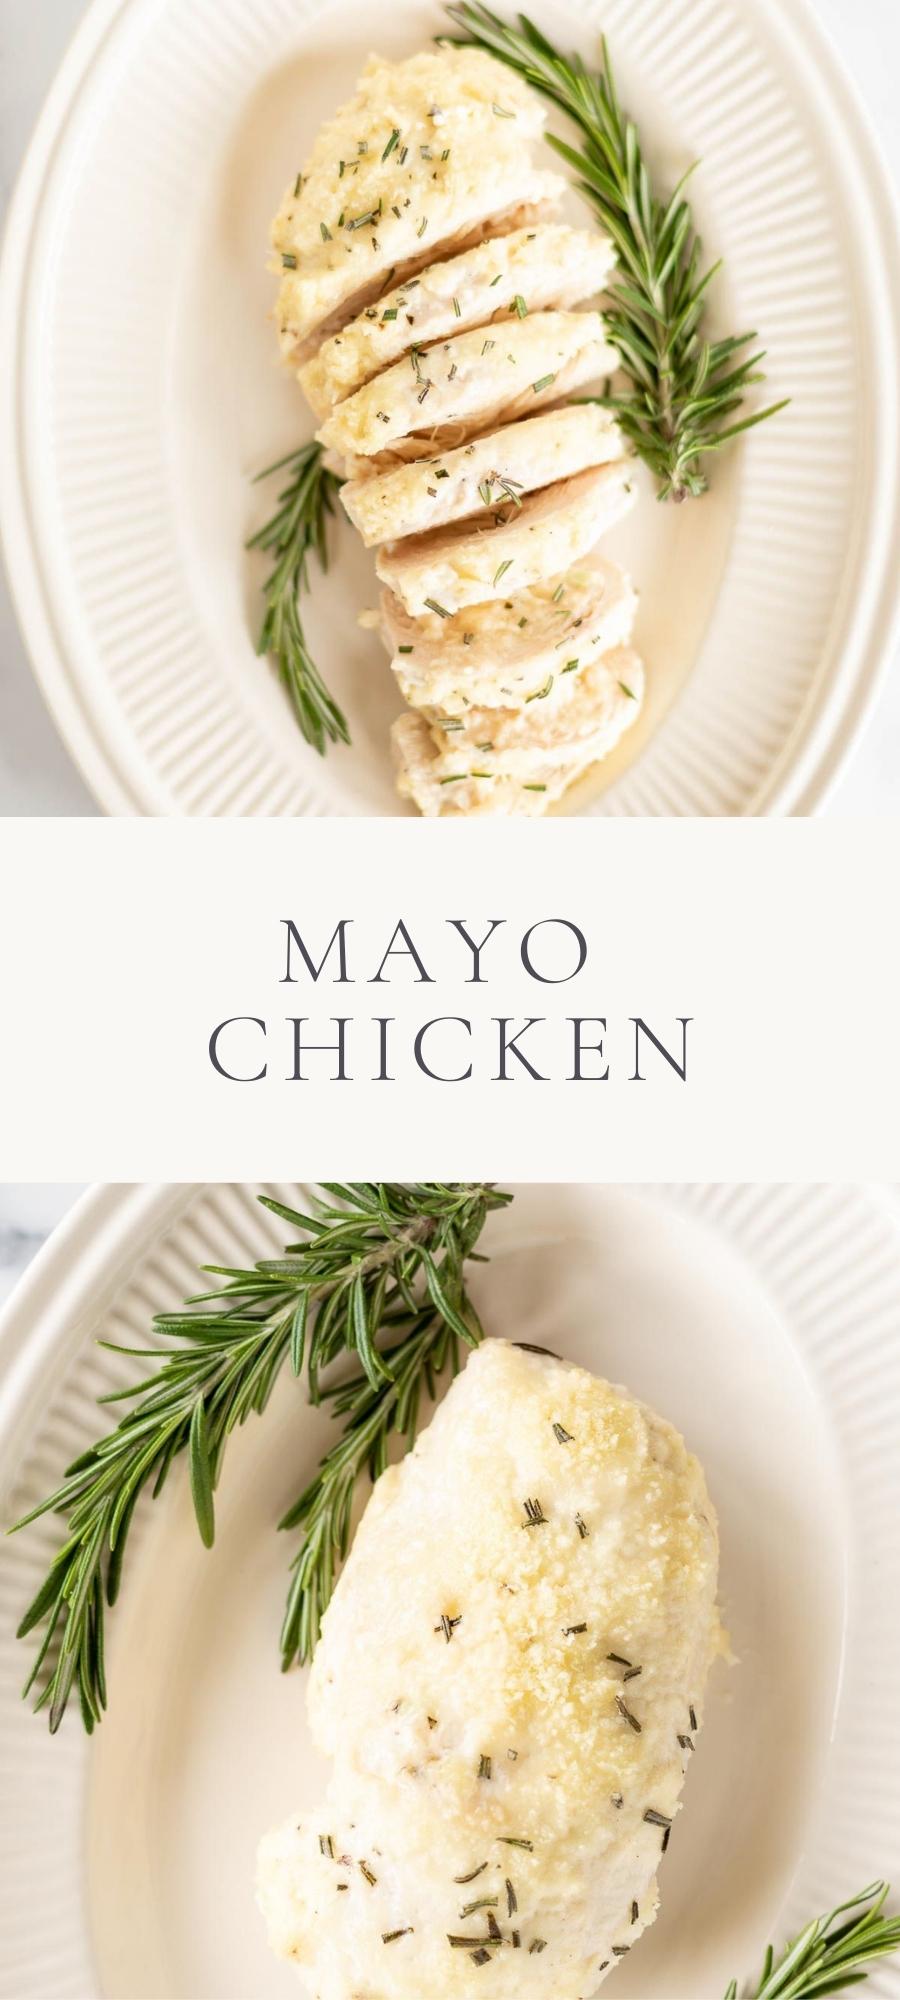 mayo chicken with green herbs on plate